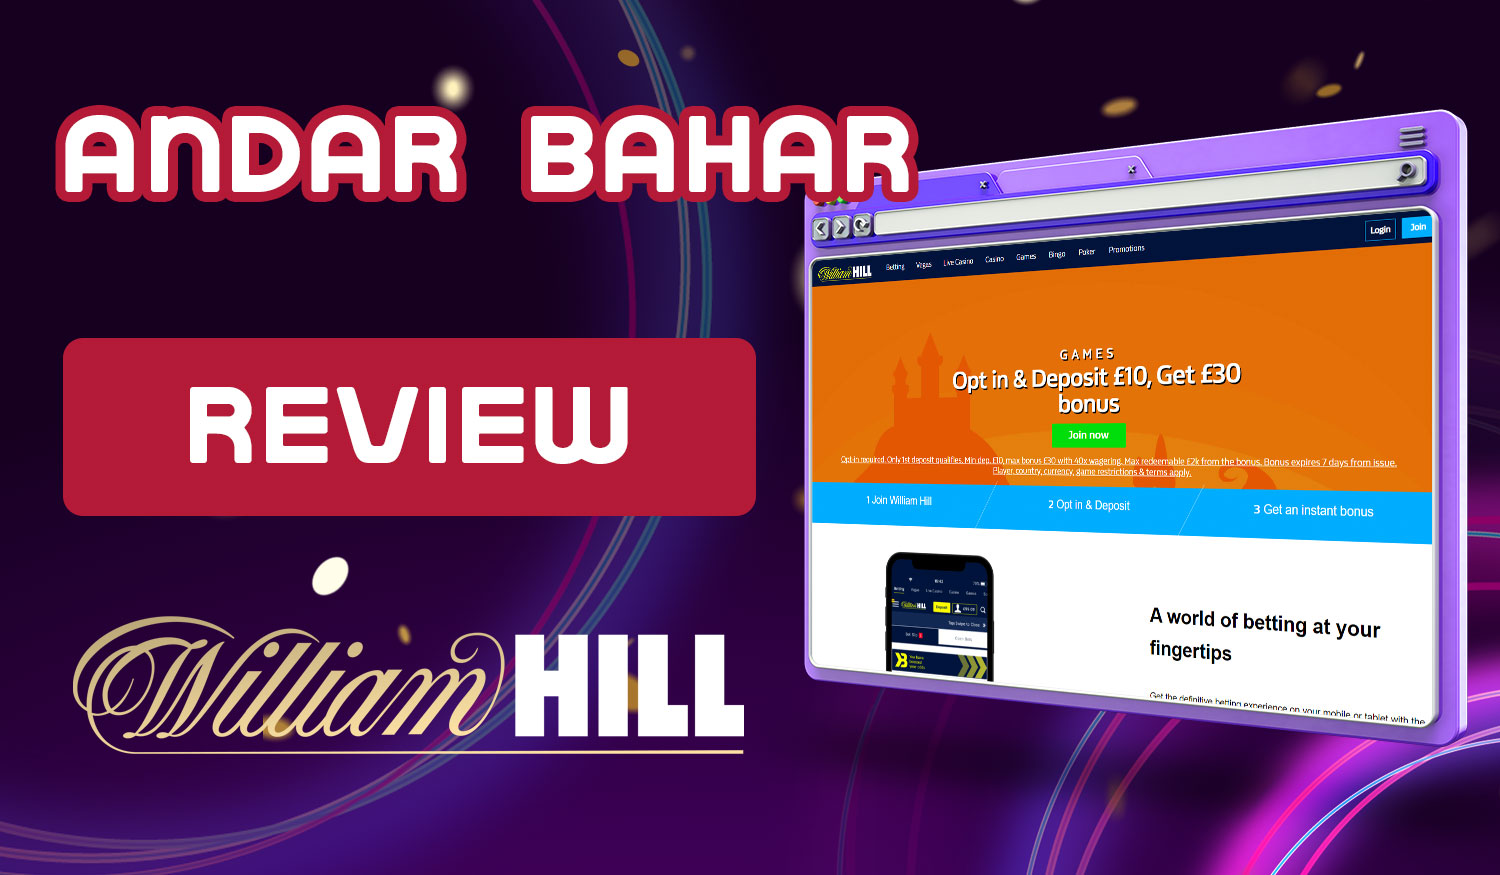 Detailed review of the William Hill India bookmaker on Andar Bahars